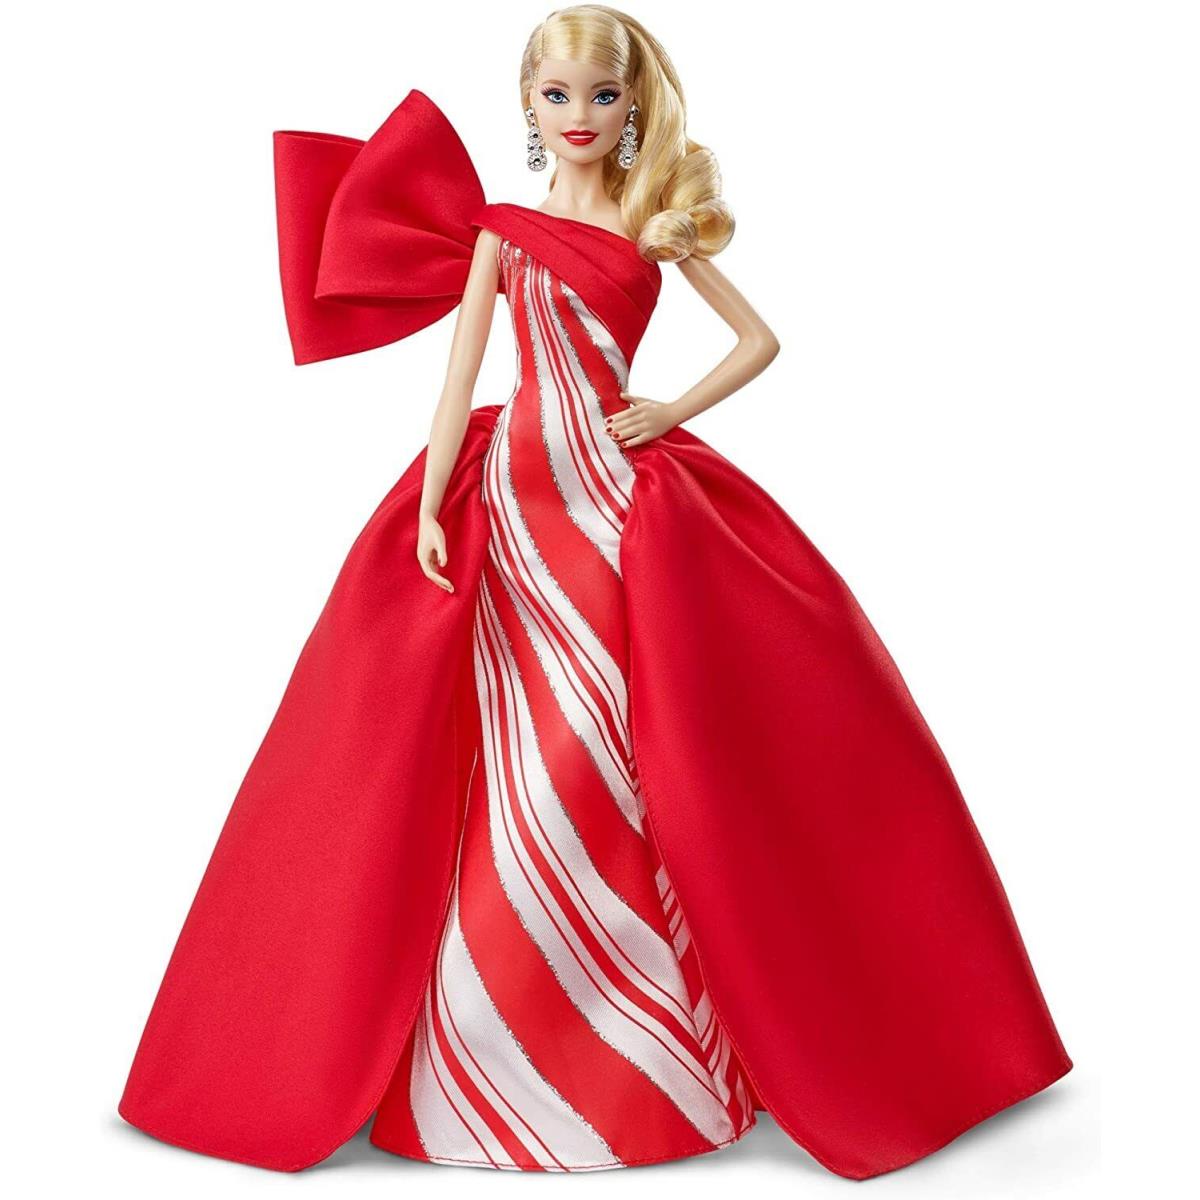 Mattel 2019 Barbie Signature Collector Holiday Barbie Collection Hair Style Blonde